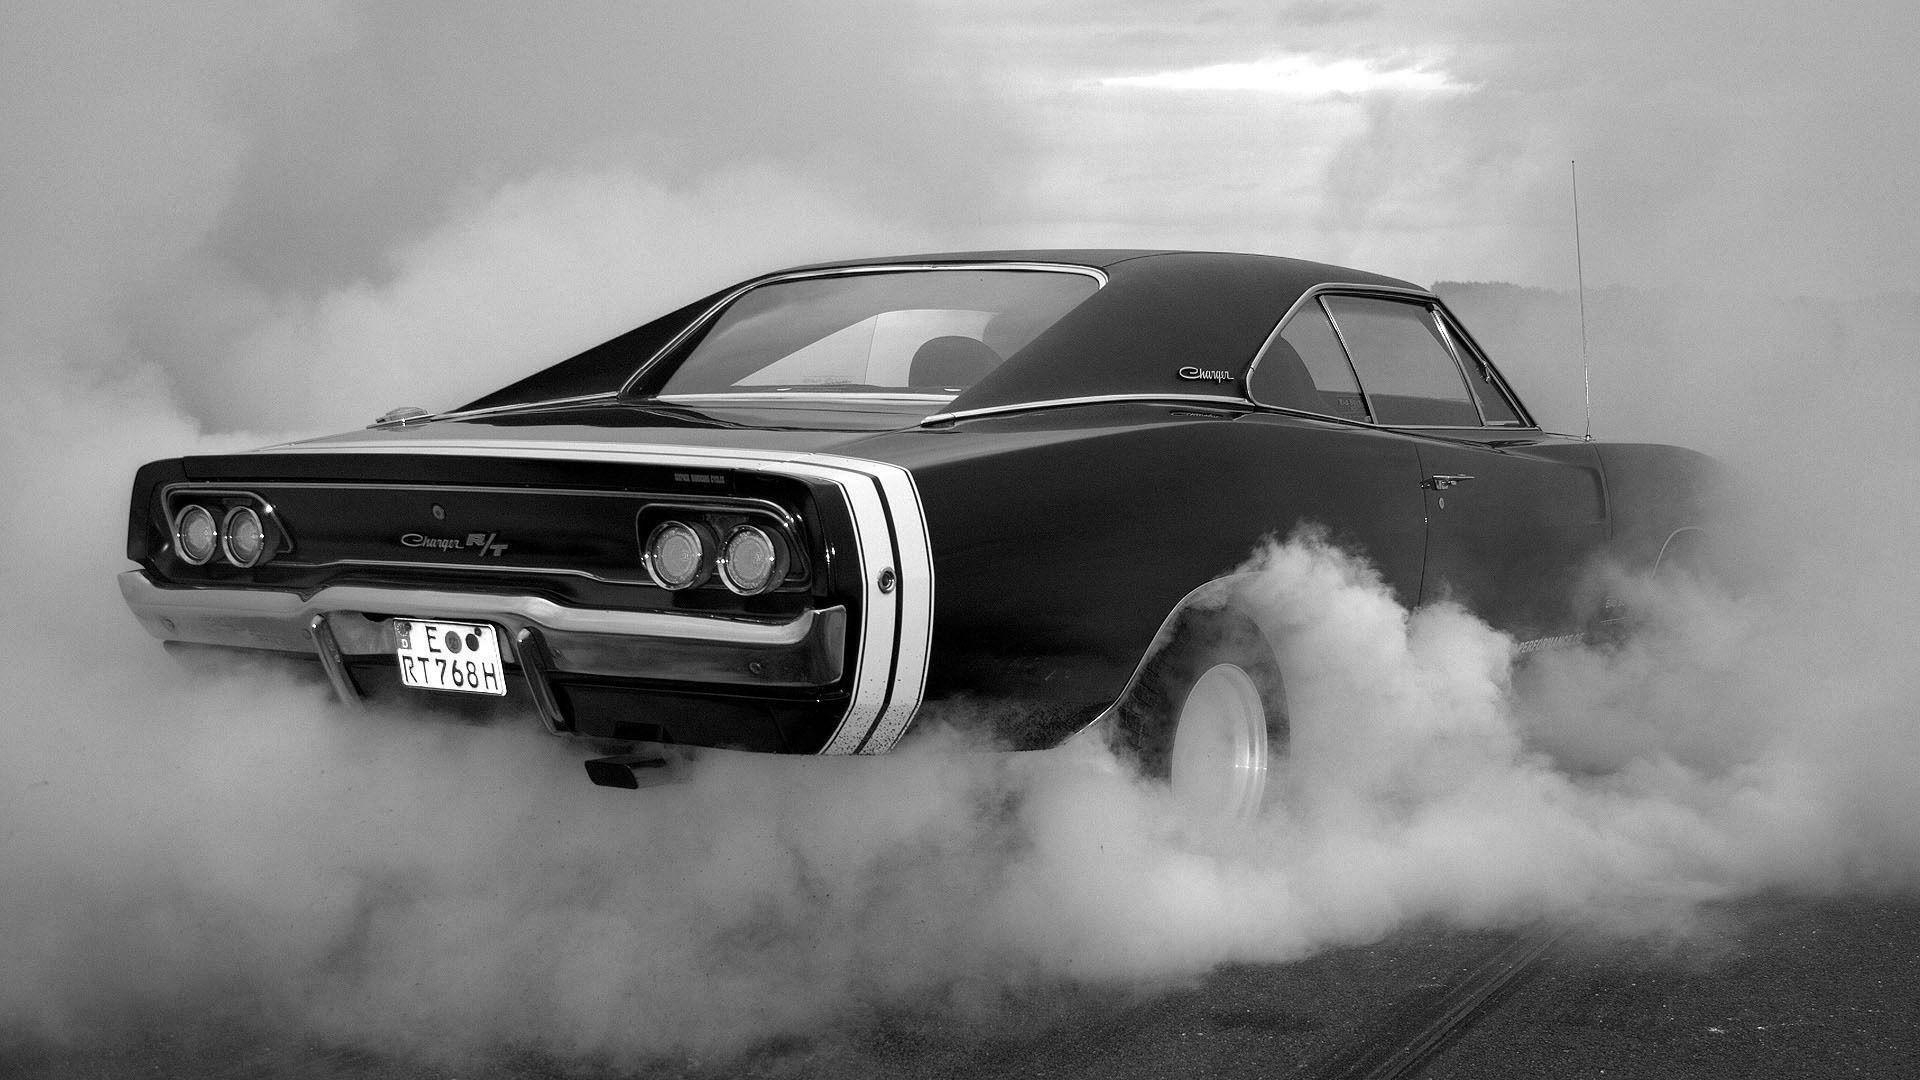 69 dodge charger wallpapers - wallpaper cave